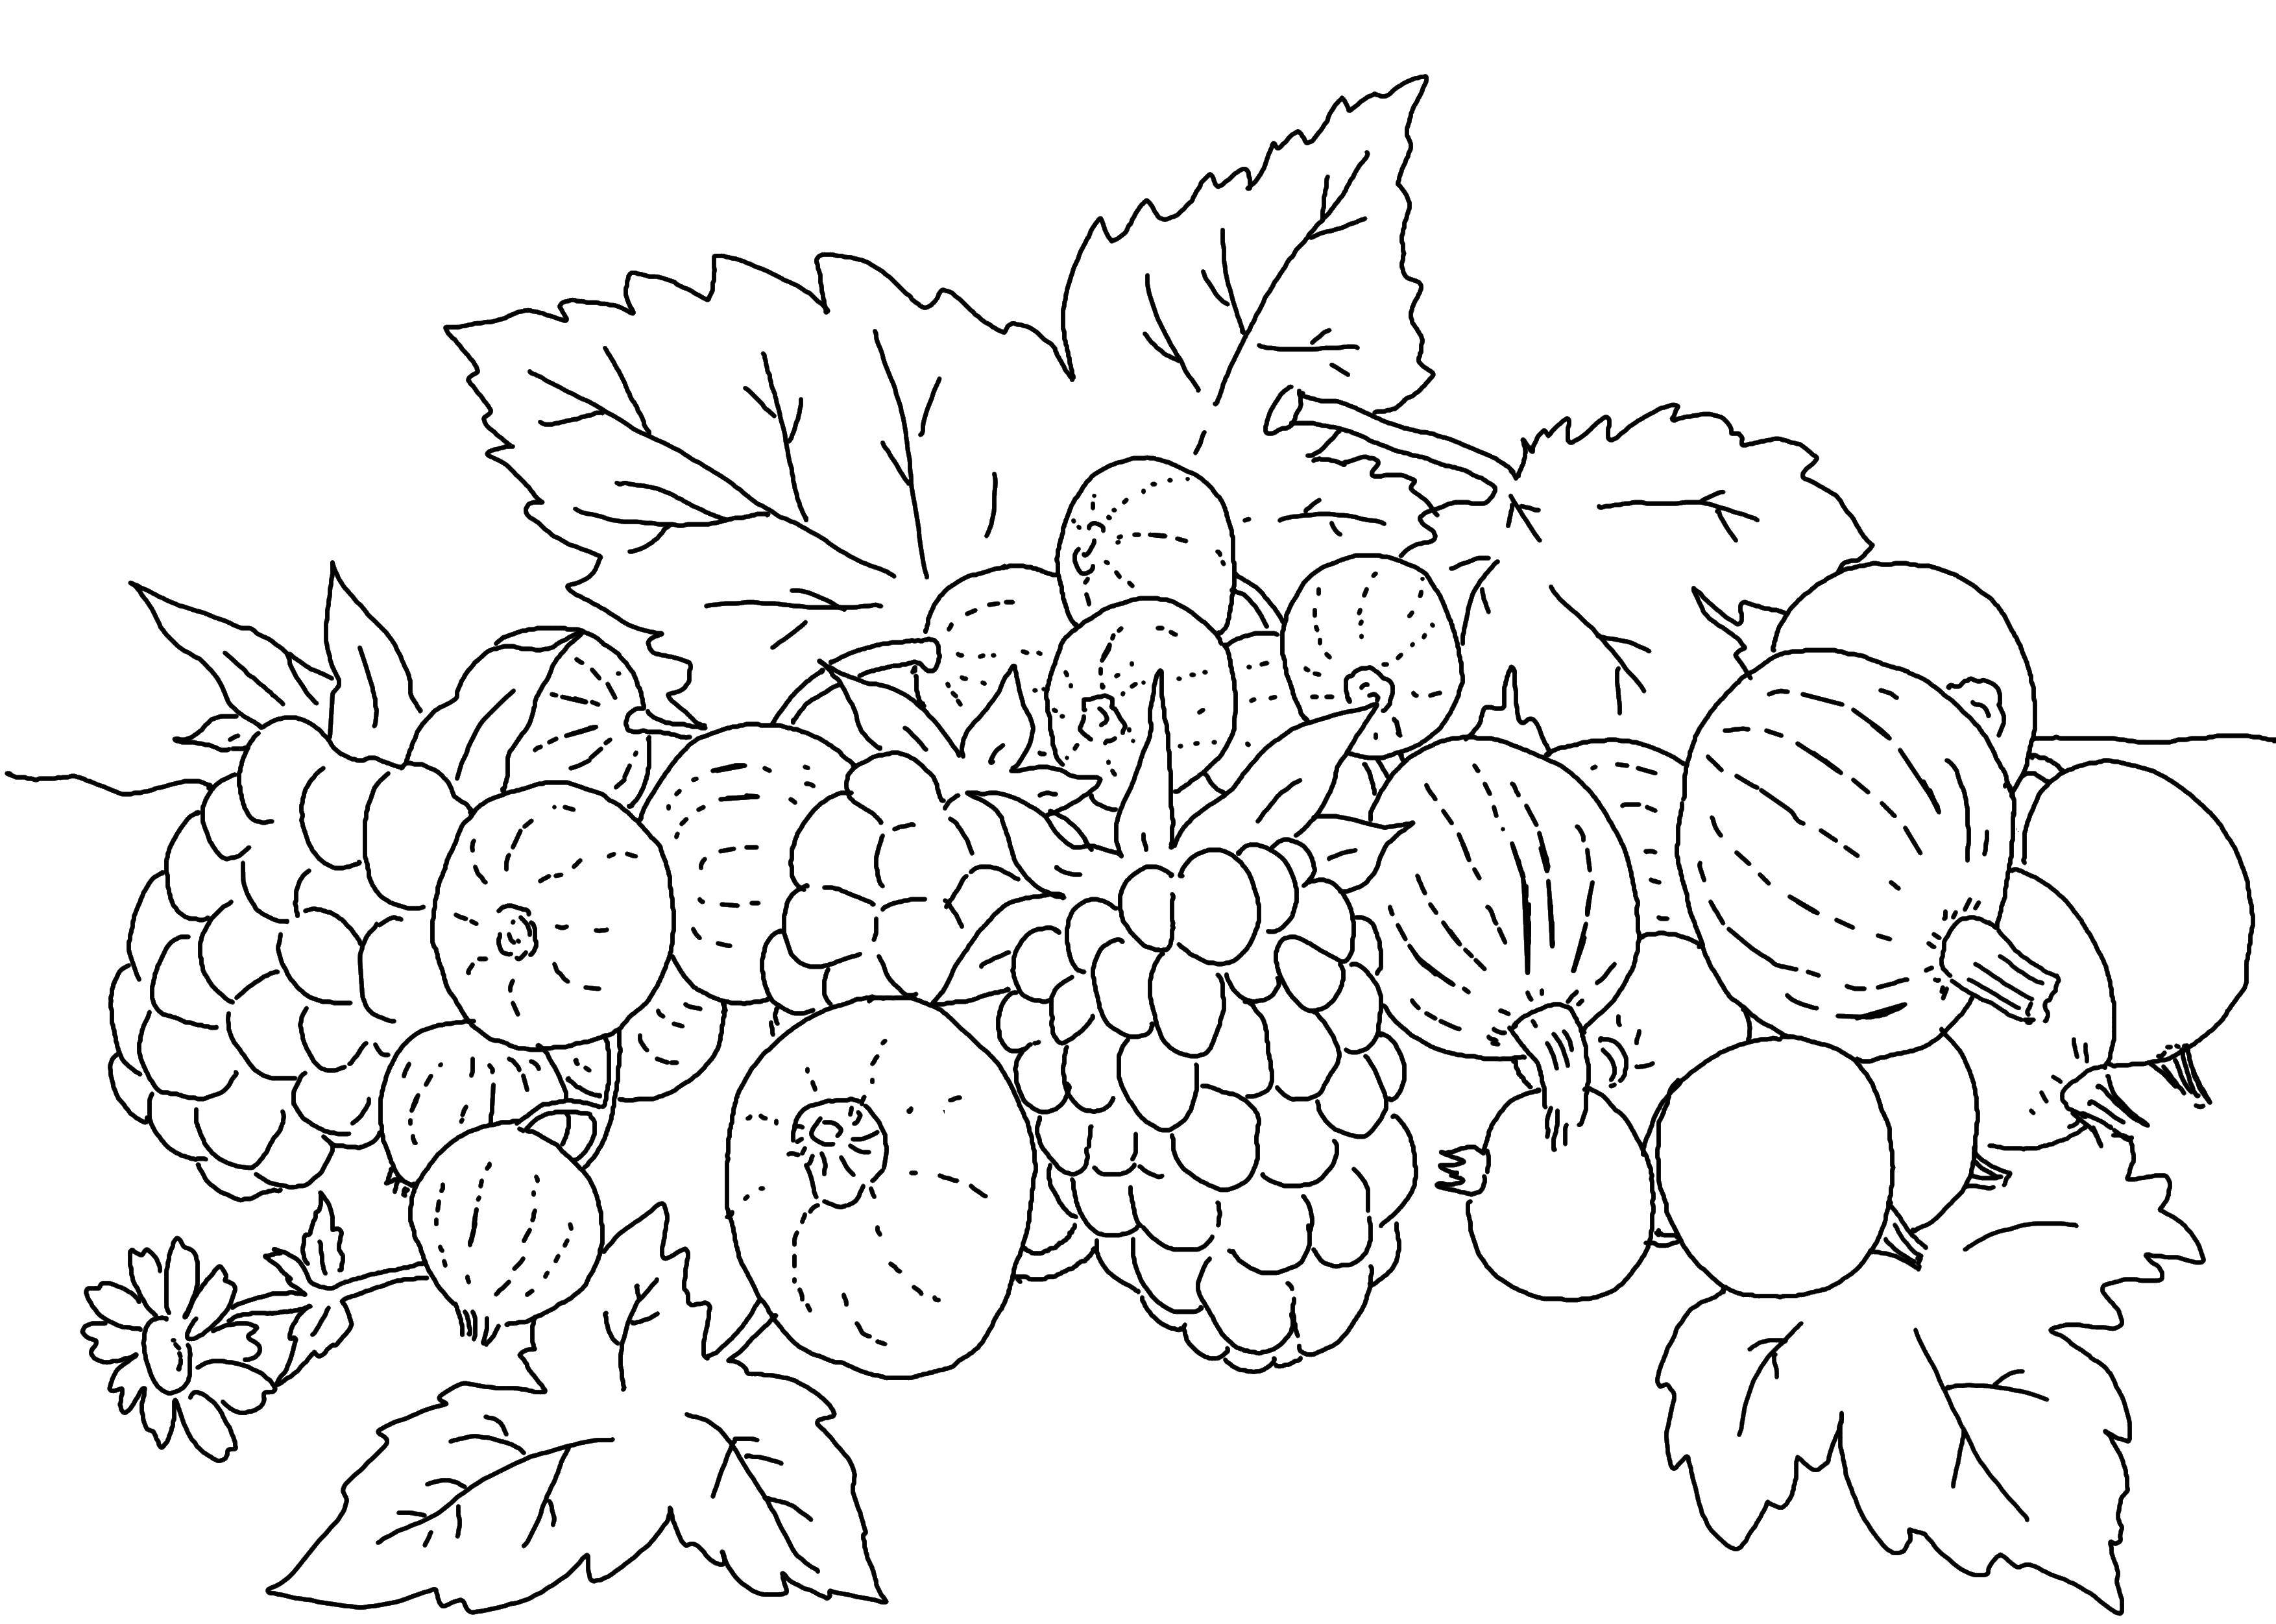 Coloring Fruits, berries and vegetables. Category coloring. Tags:  fruits, vegetables, berries.